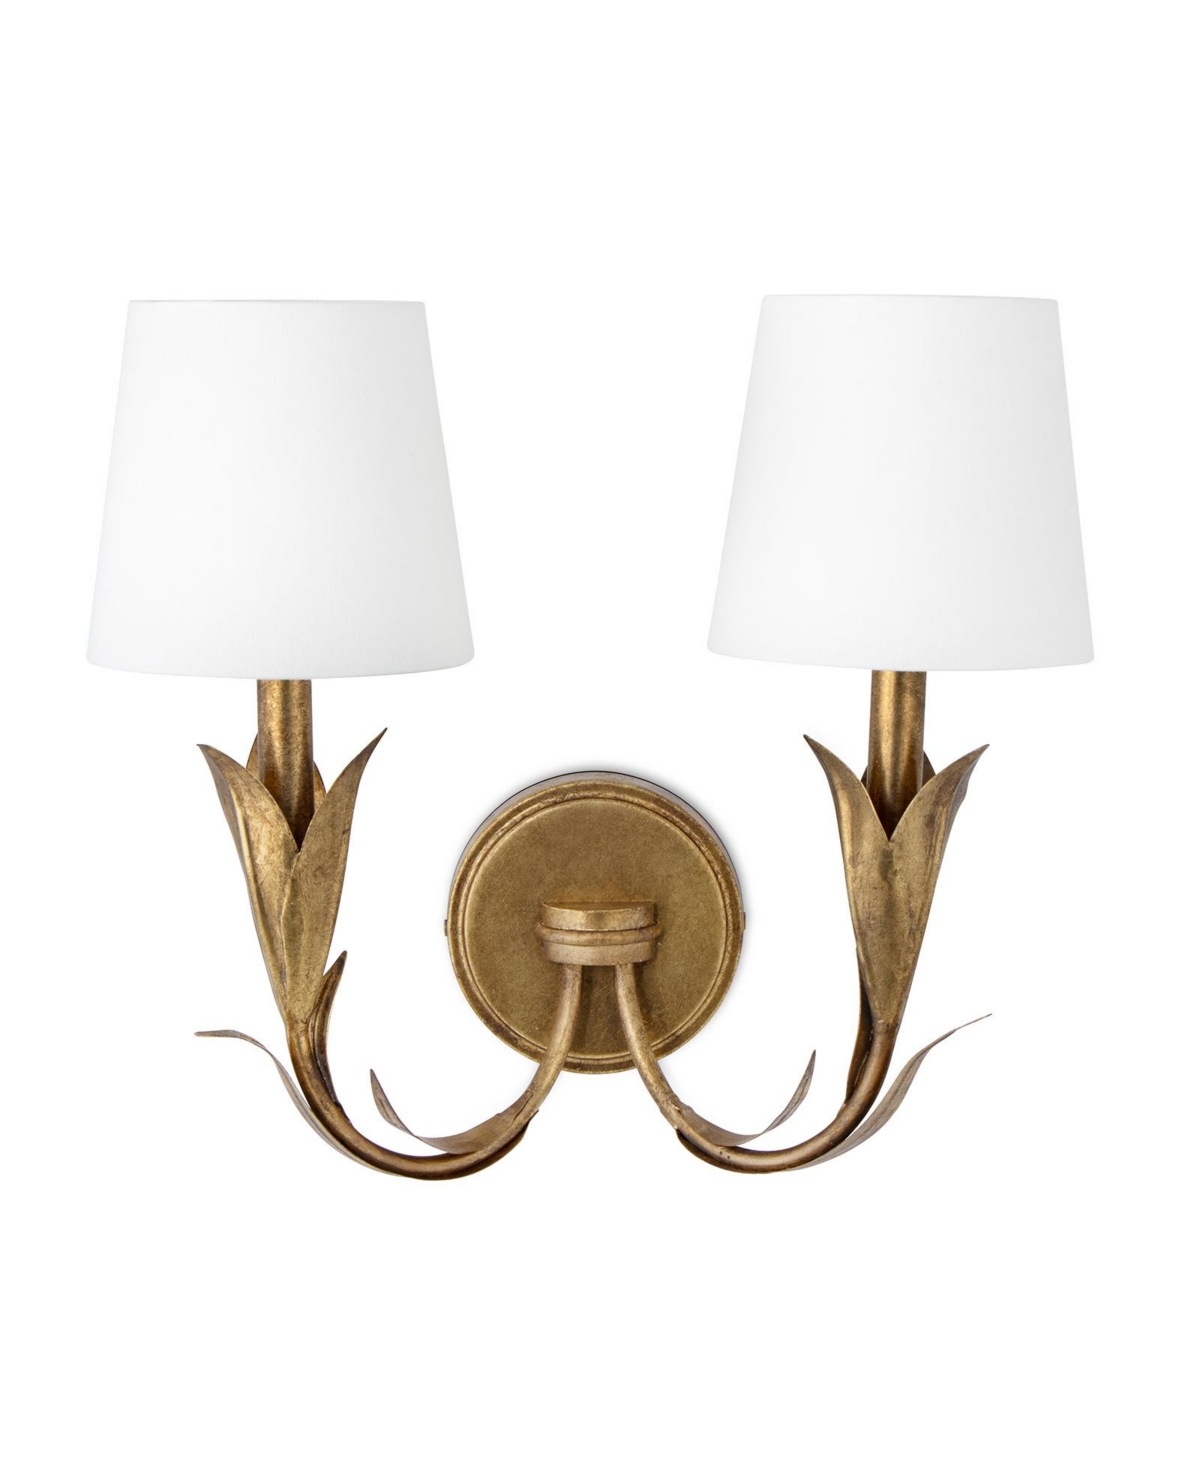 REGINA ANDREW RIVER REED DOUBLE SCONCE LAMP